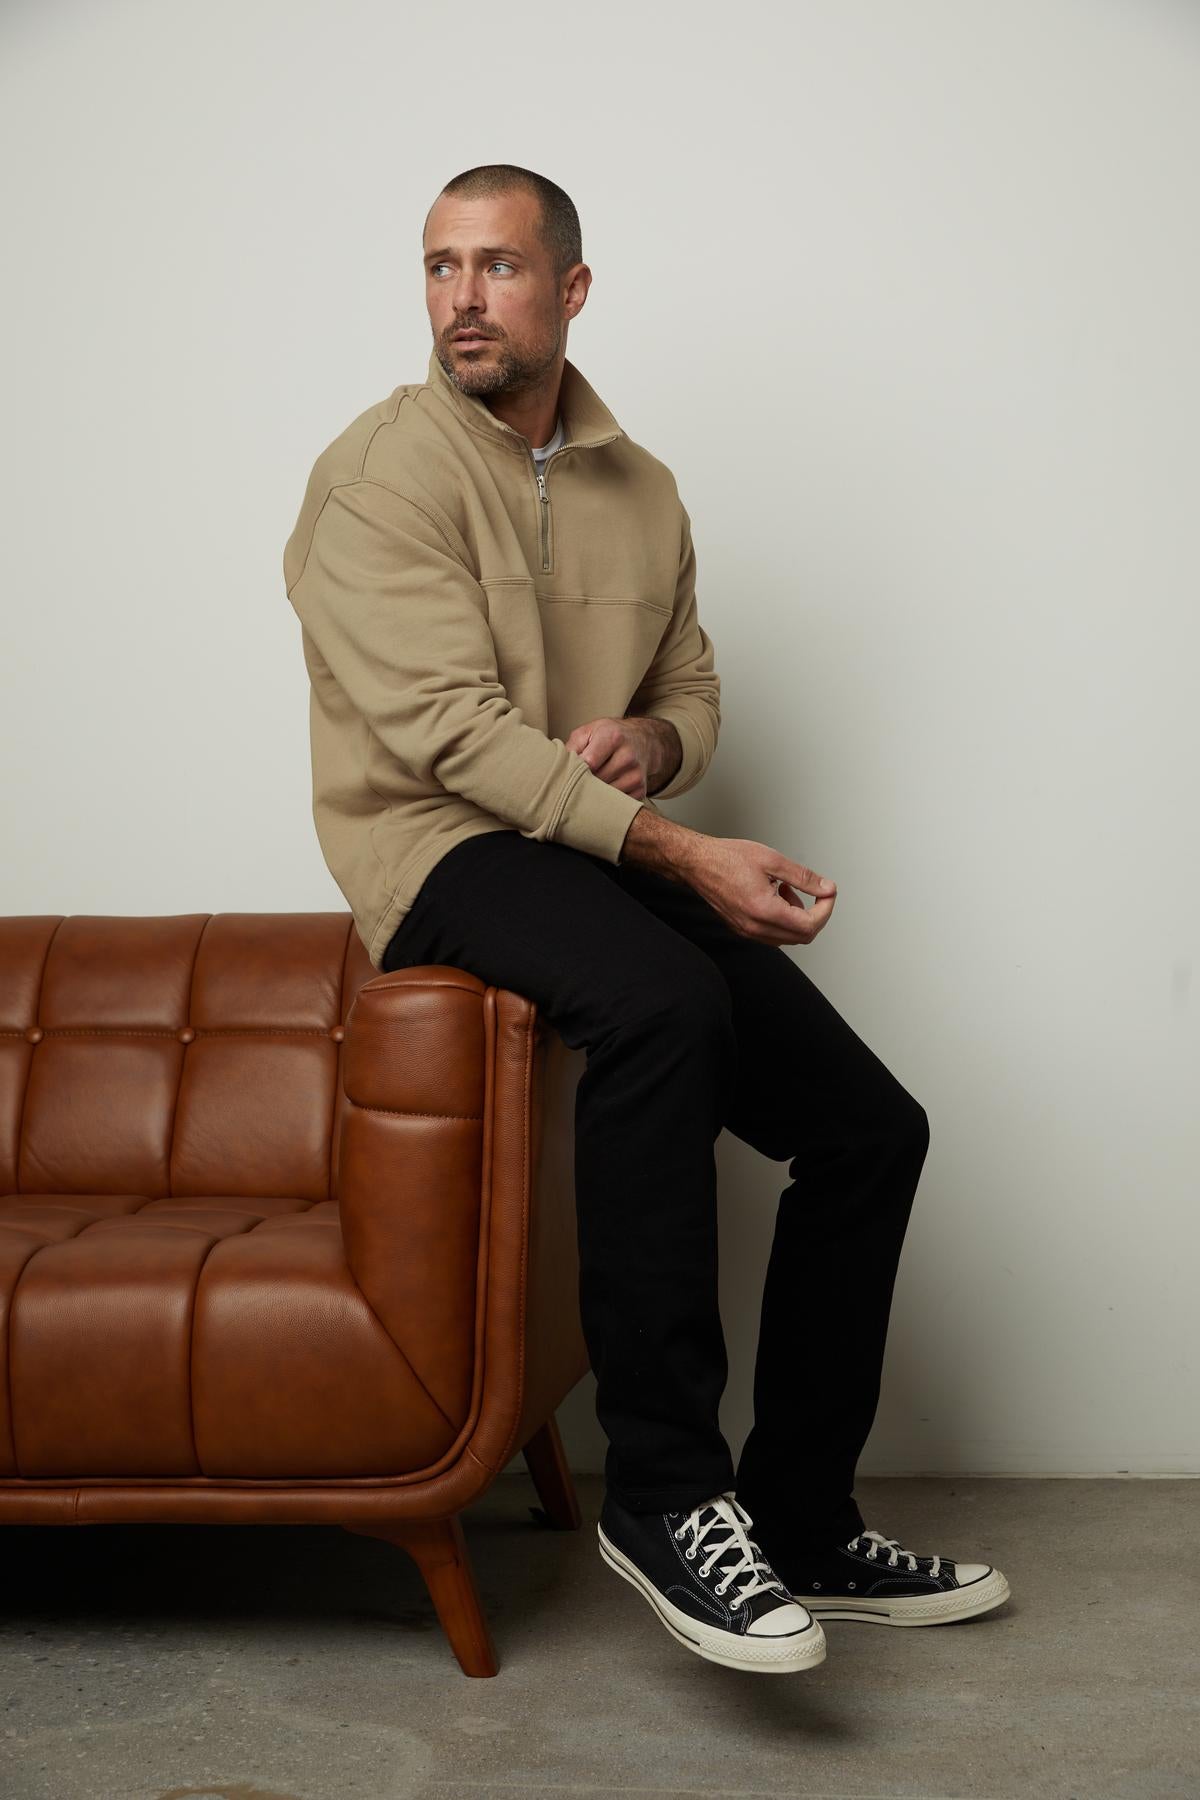 A man sitting on a brown leather couch, wearing a BOSCO QUARTER-ZIP SWEATSHIRT by Velvet by Graham & Spencer.-35547515257025